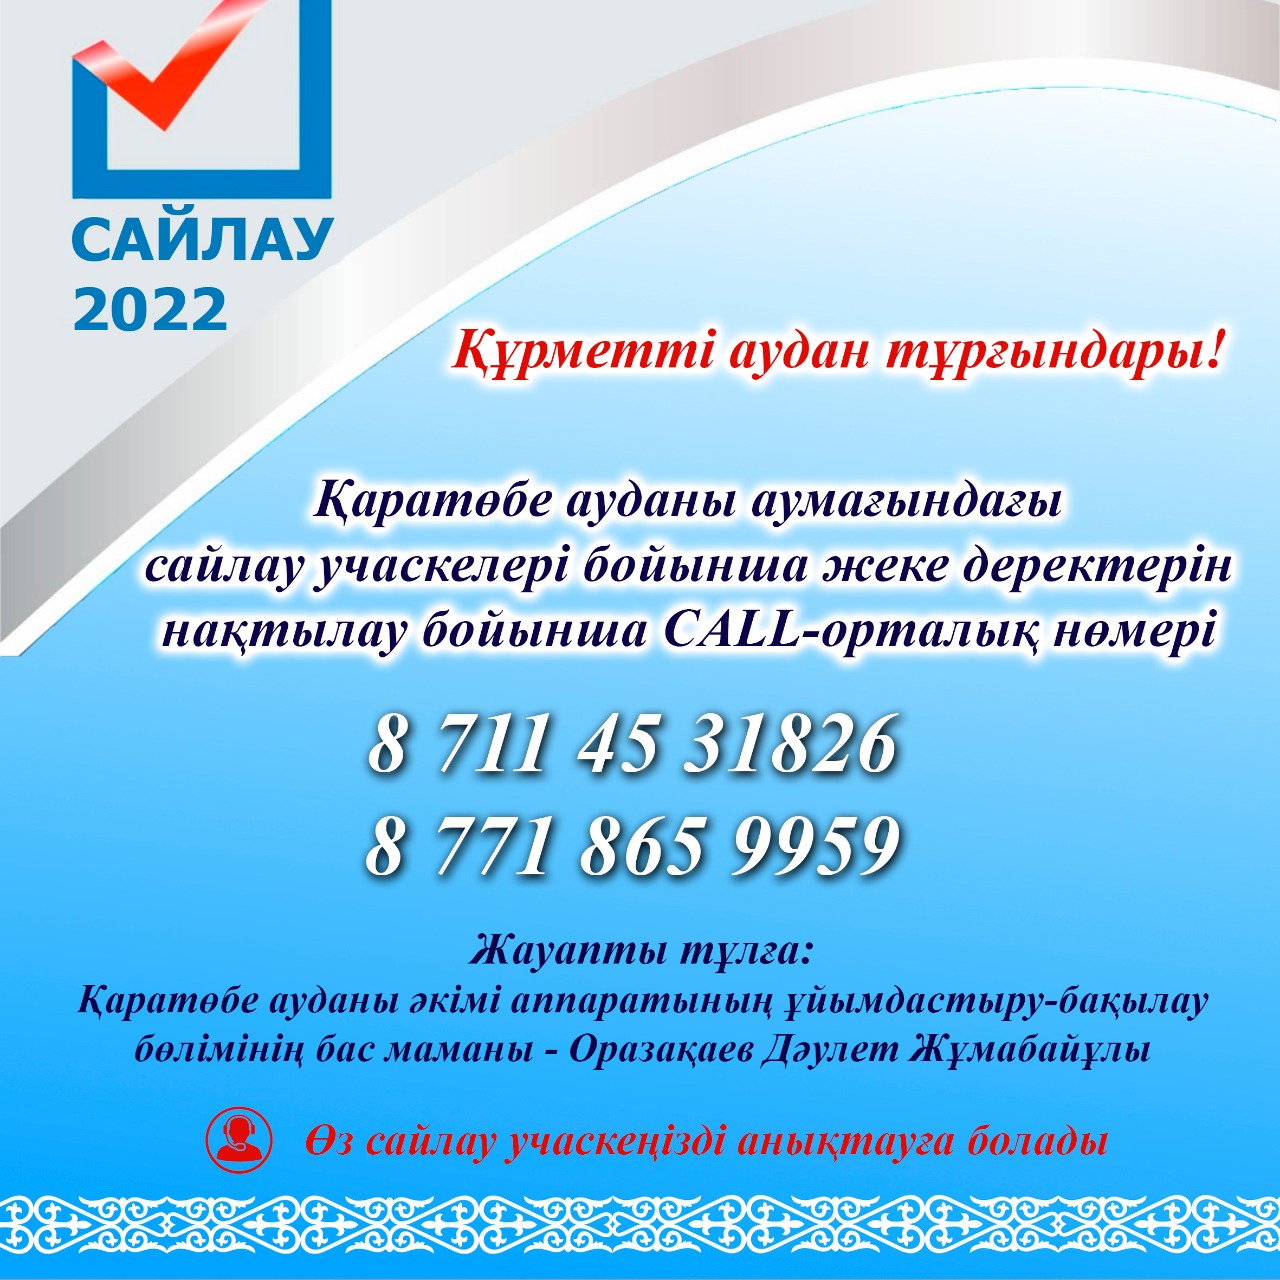 The number of the CALL center for clarifying personal data on polling stations in the territory of the Karatobе district